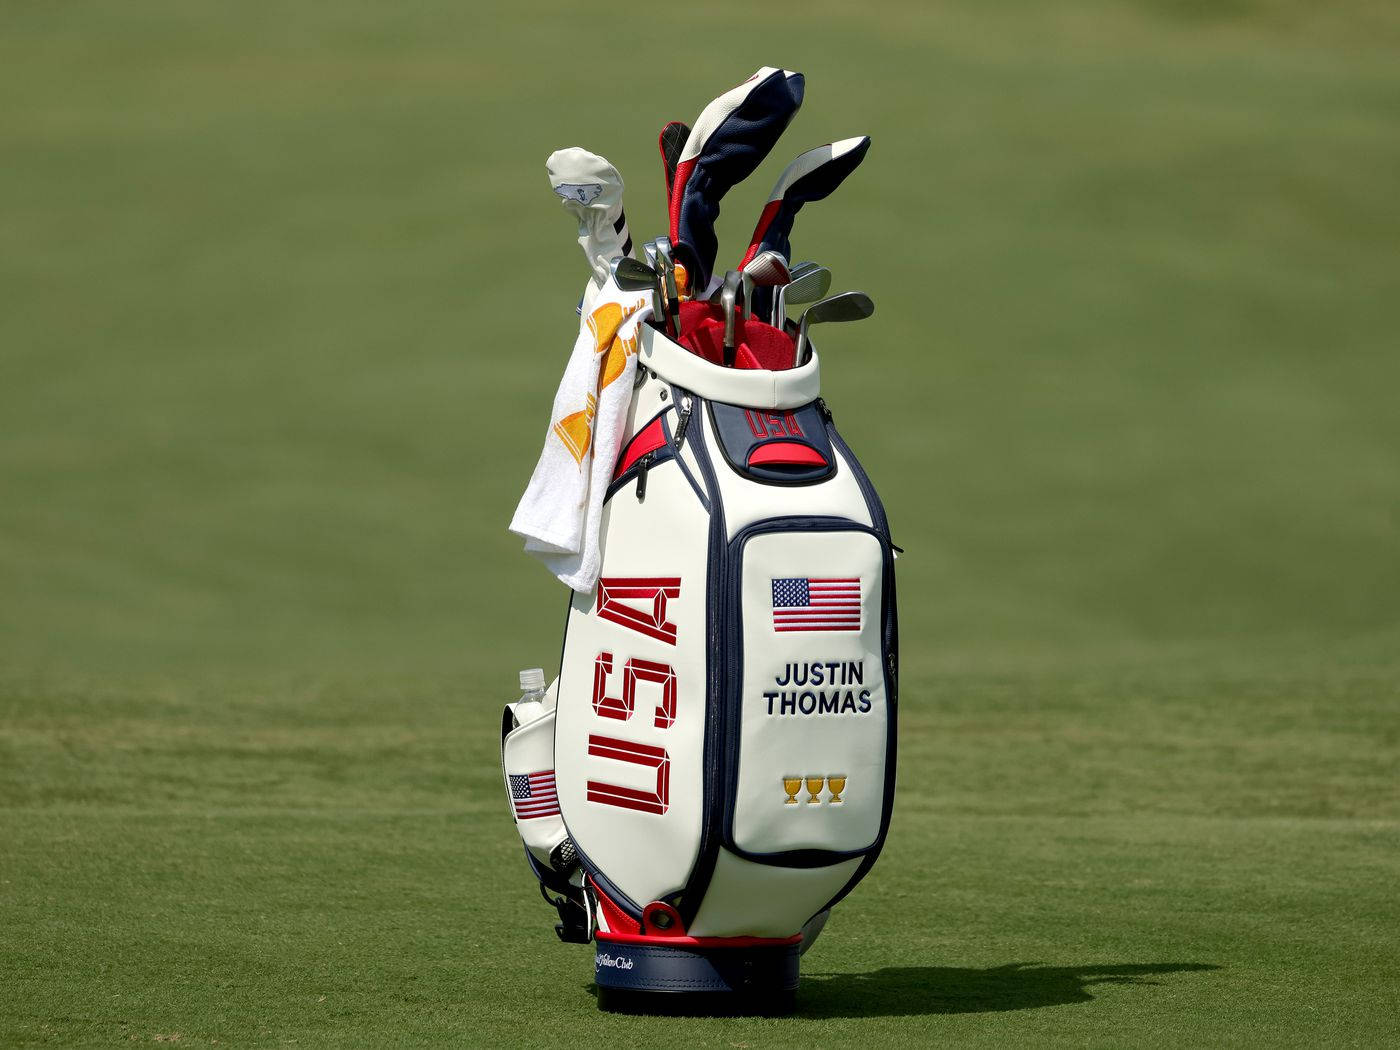 Justin Thomas with his golf bag on-course Wallpaper